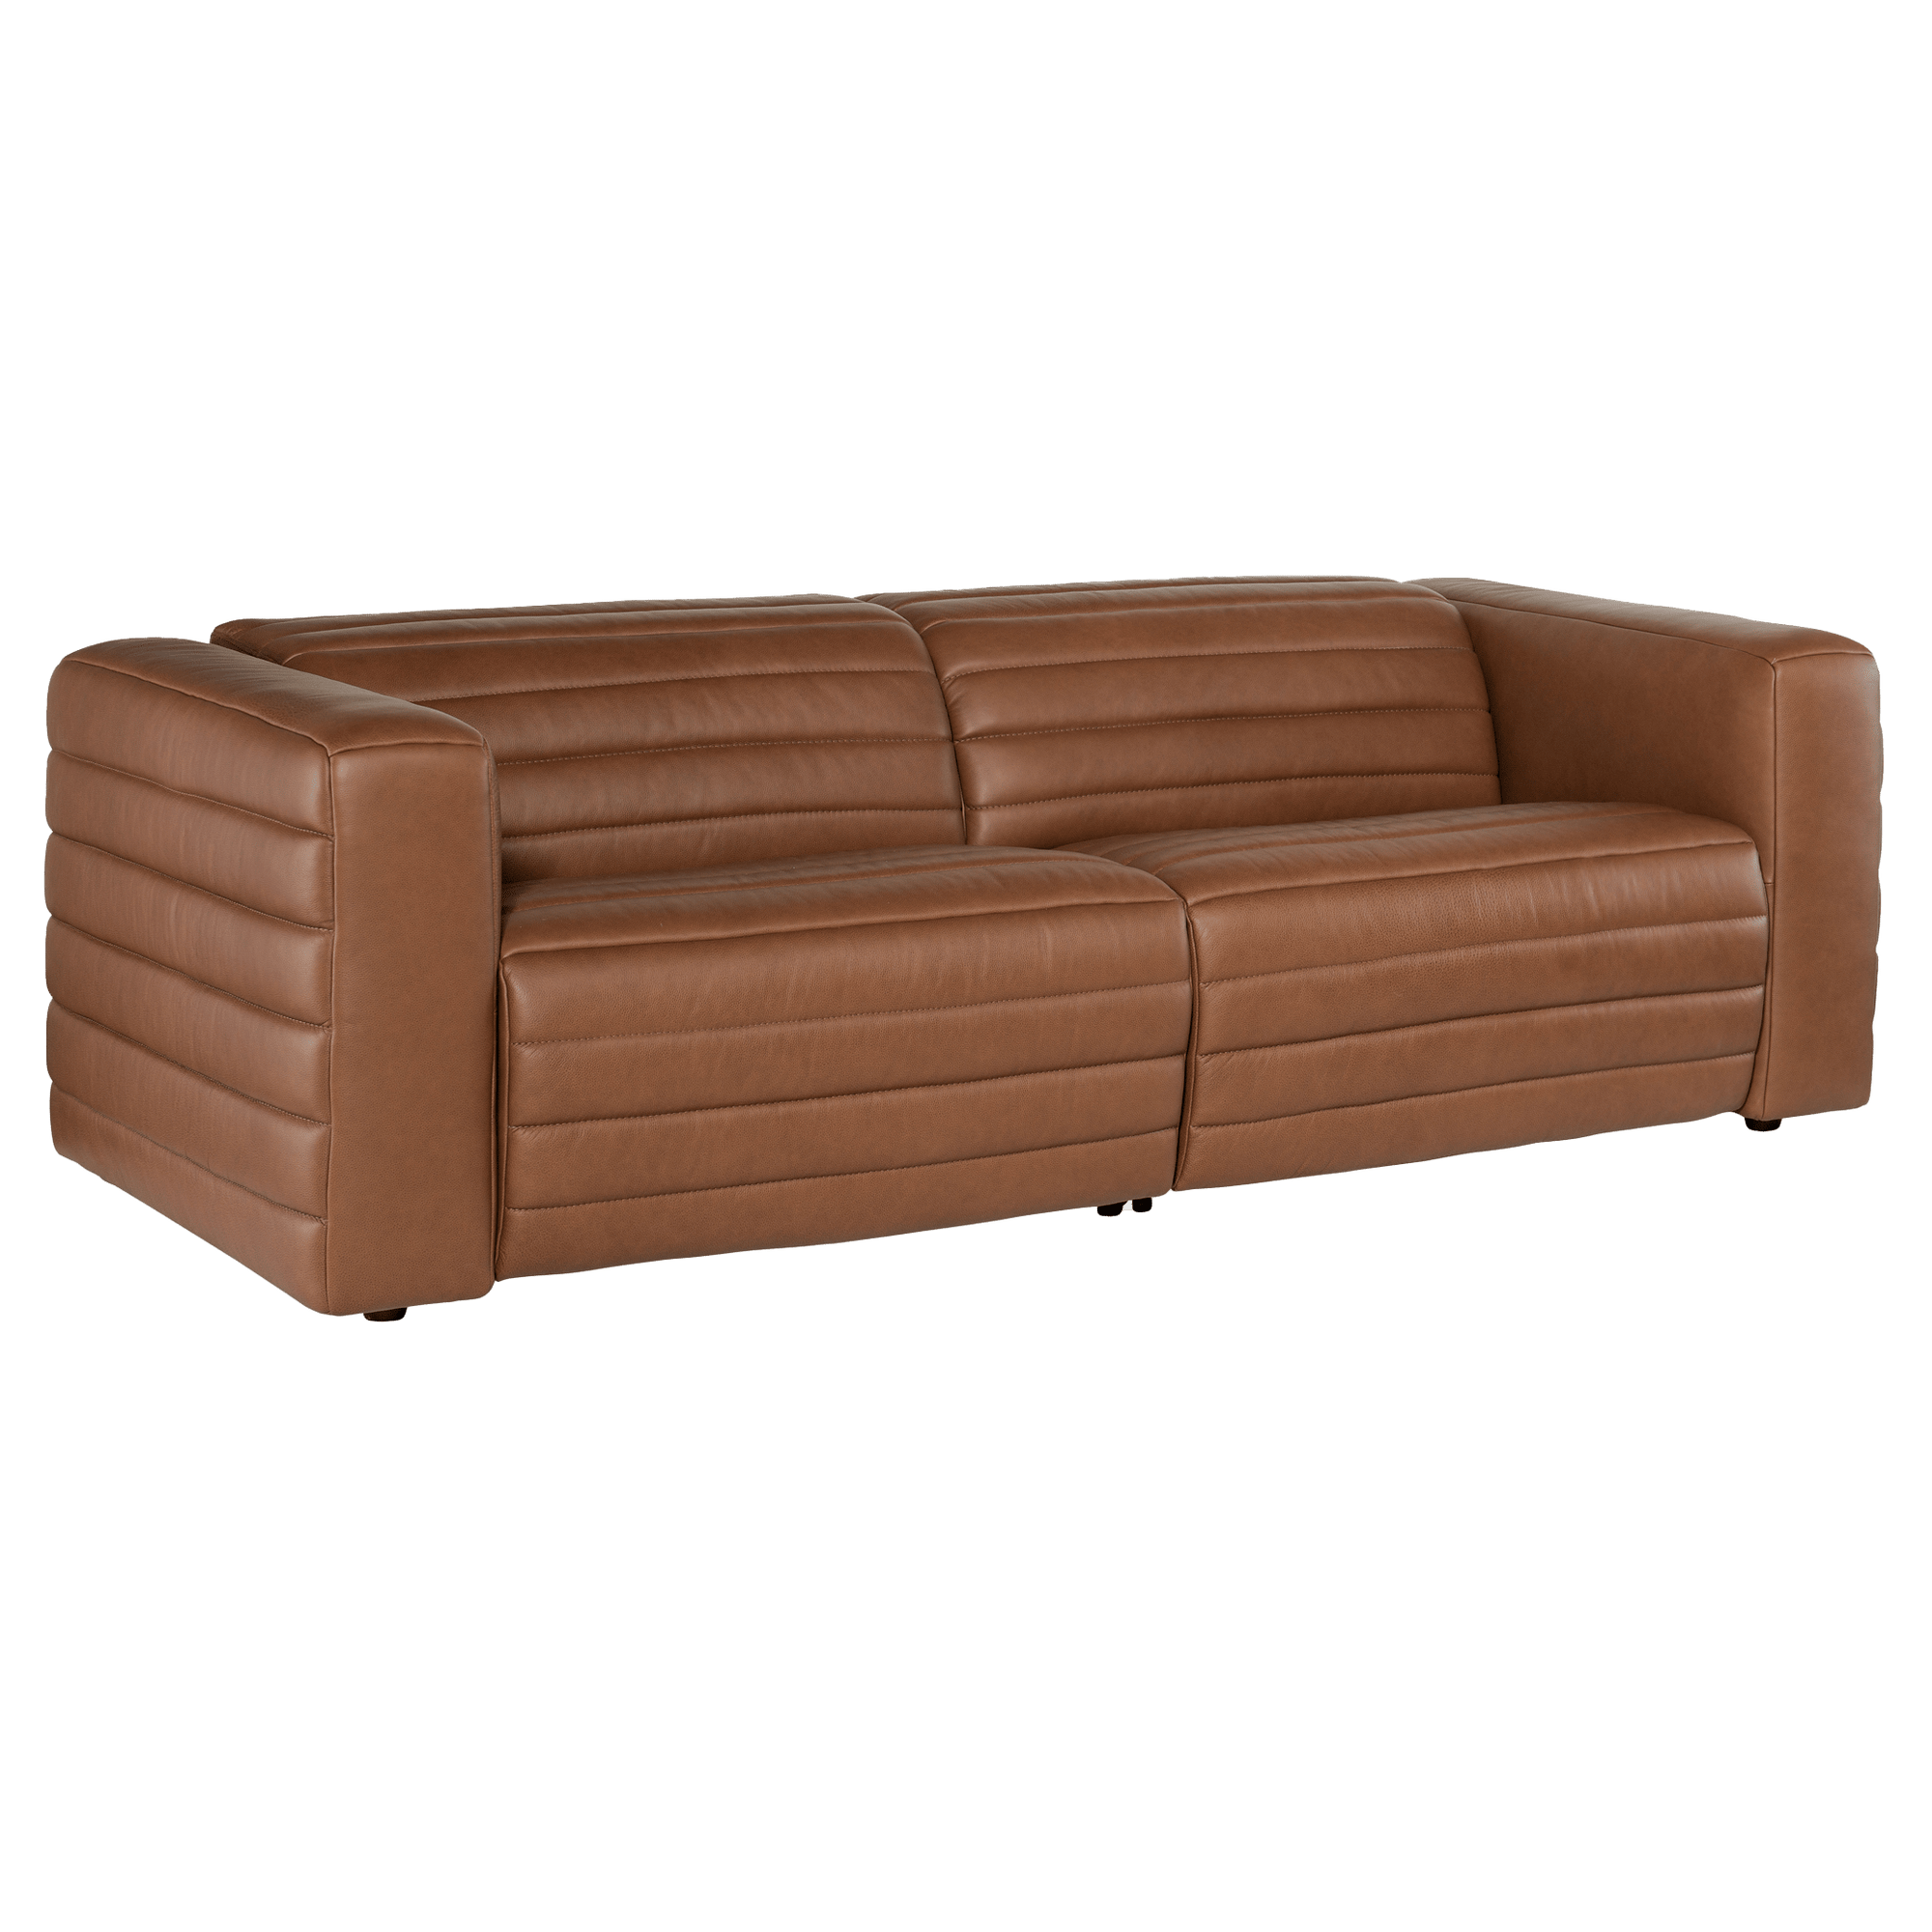 Cathal 89" Wide Upholstered Leather Sofa, Brown